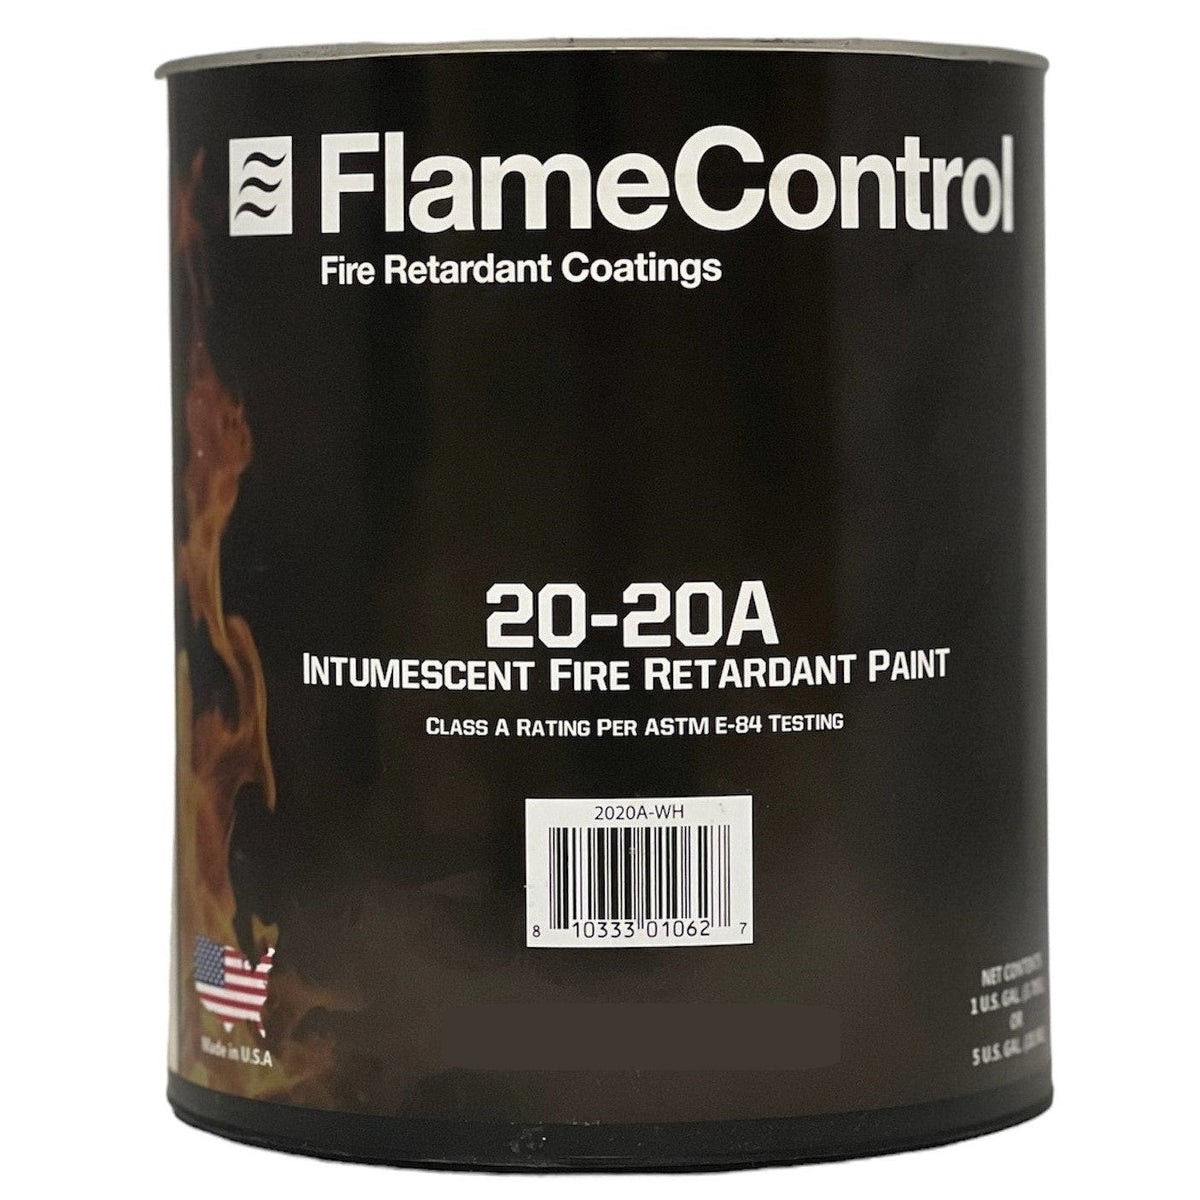 Flame Control 20-20A, Water-Based Intumescent Fire Retardant Paint, Flat, Class A Rating